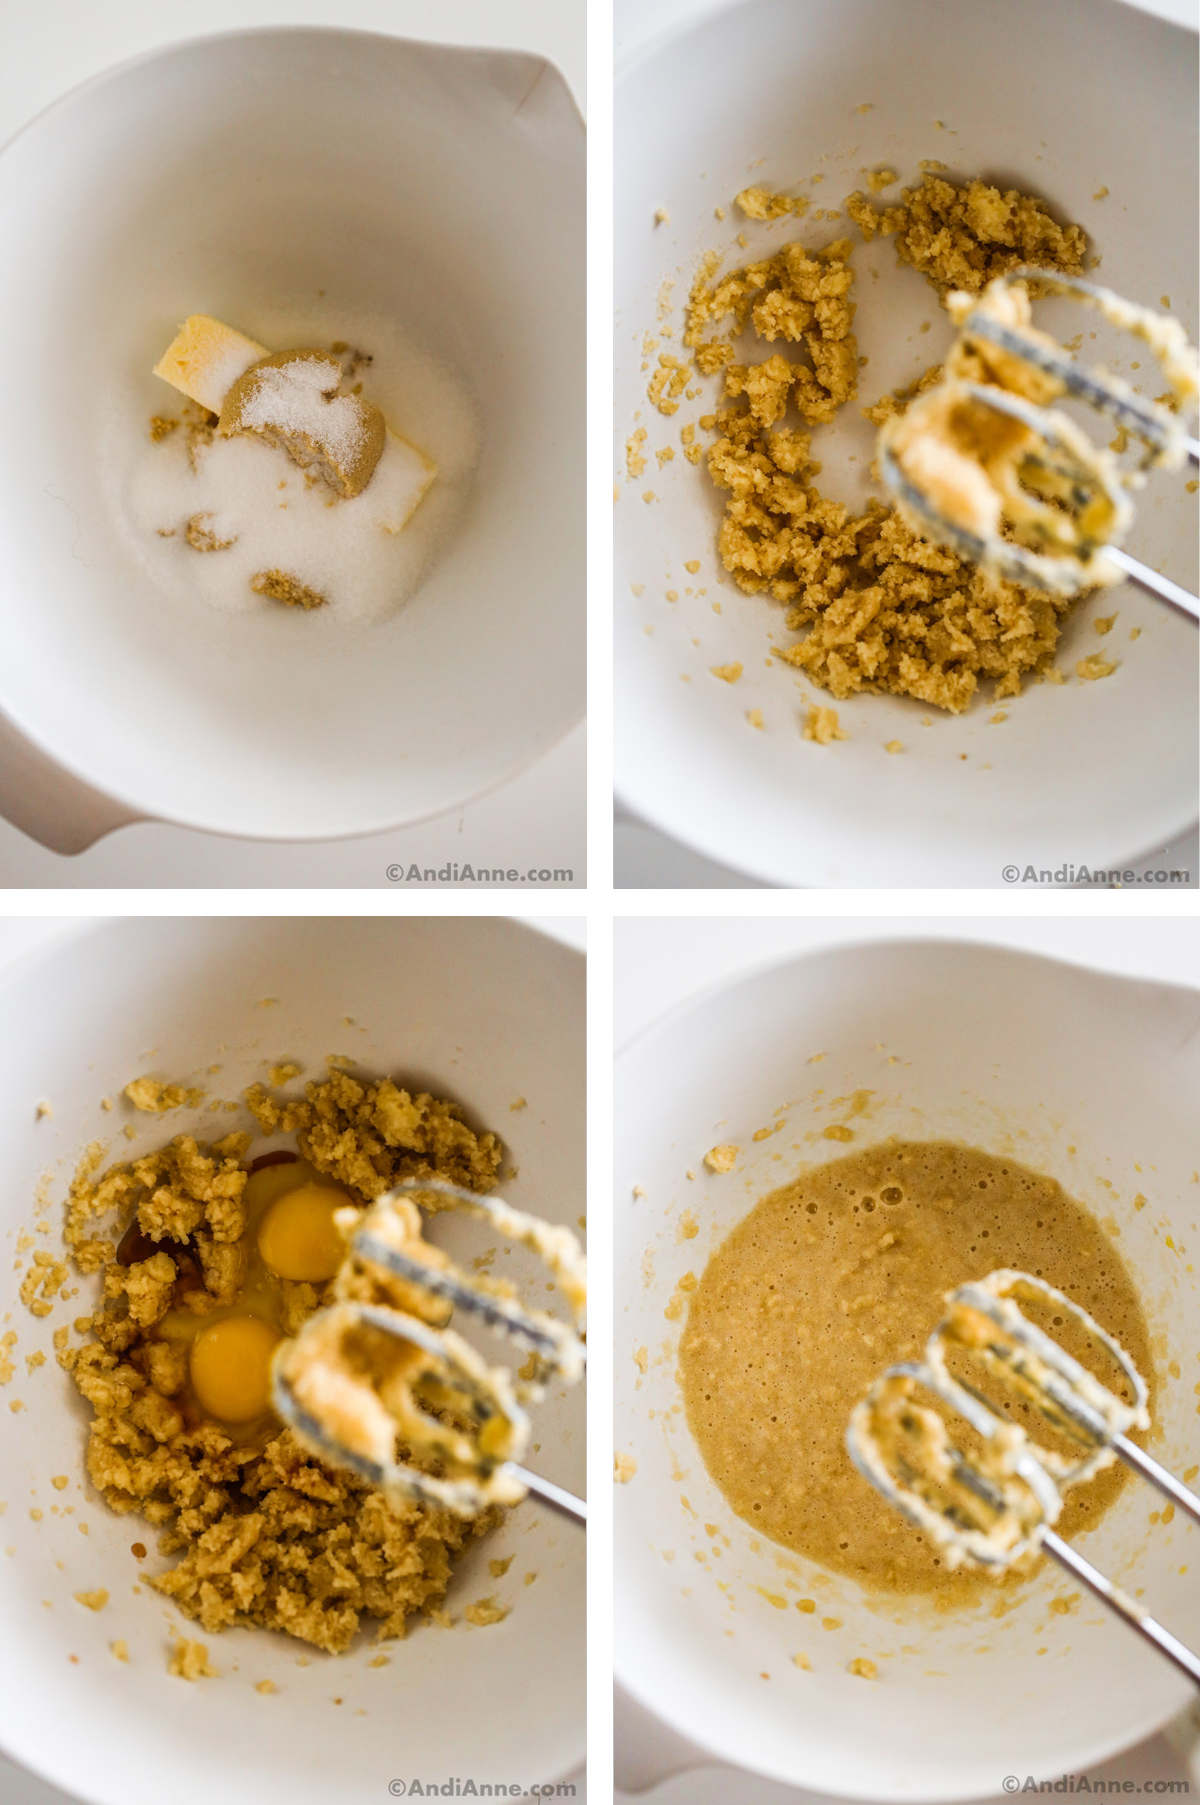 Four images in one: 1. Overhead view of butter, granulated sugar and brown sugar in a white bowl. 2. Ingredients are mixed with a hand mixer. 3. Two eggs are added. 4. Eggs are mixed with hand mixer. 